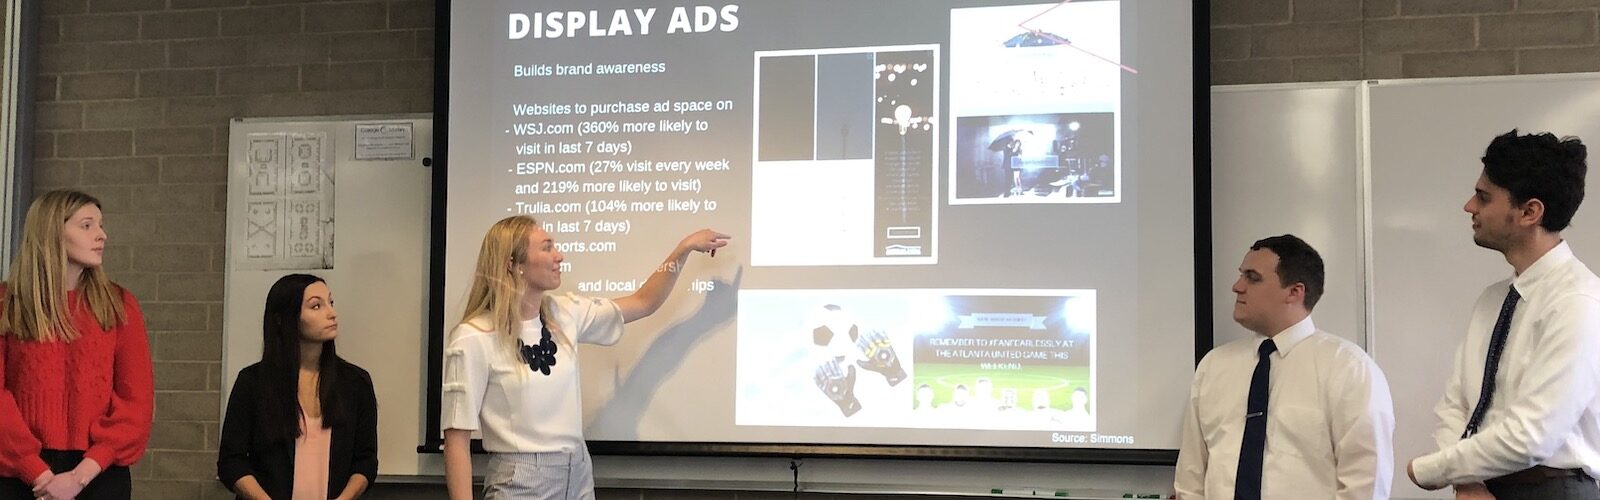 Students standing in front of a projector screen with a slide that reads "Display Ads"